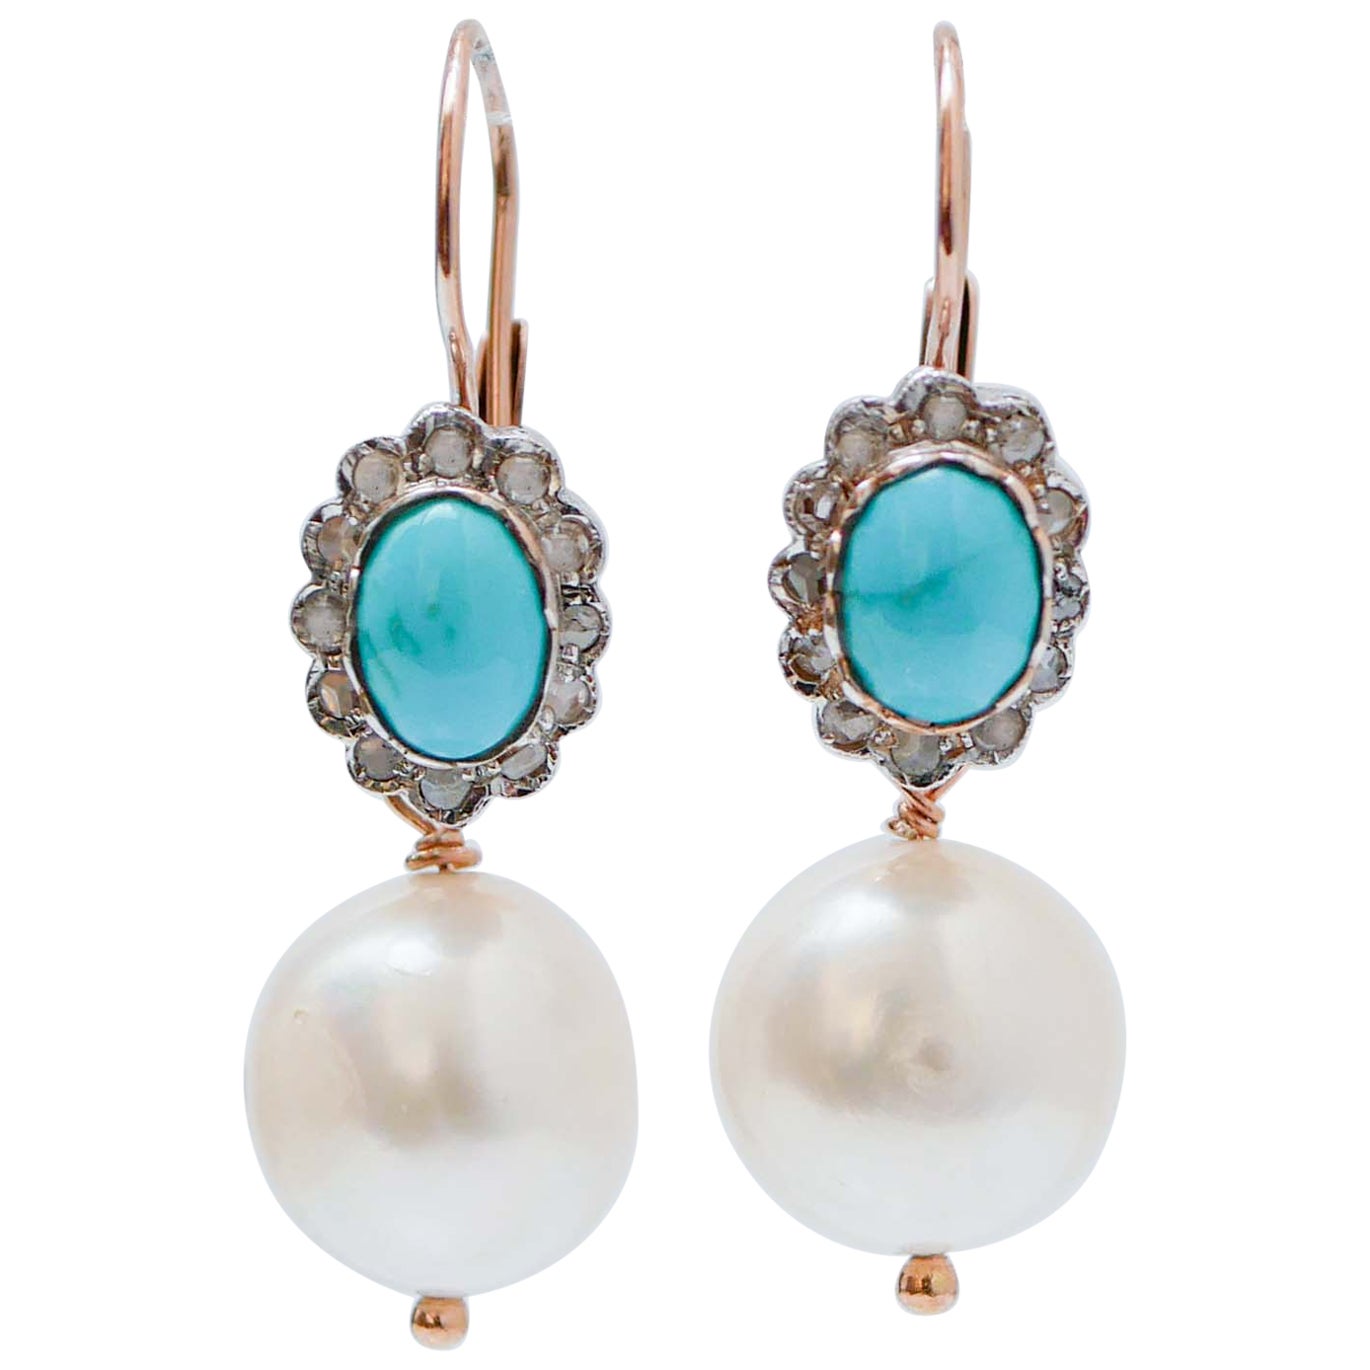 White Pearls, Turquoise, Diamonds, Rose Gold and Silver Dangle Earrings. For Sale